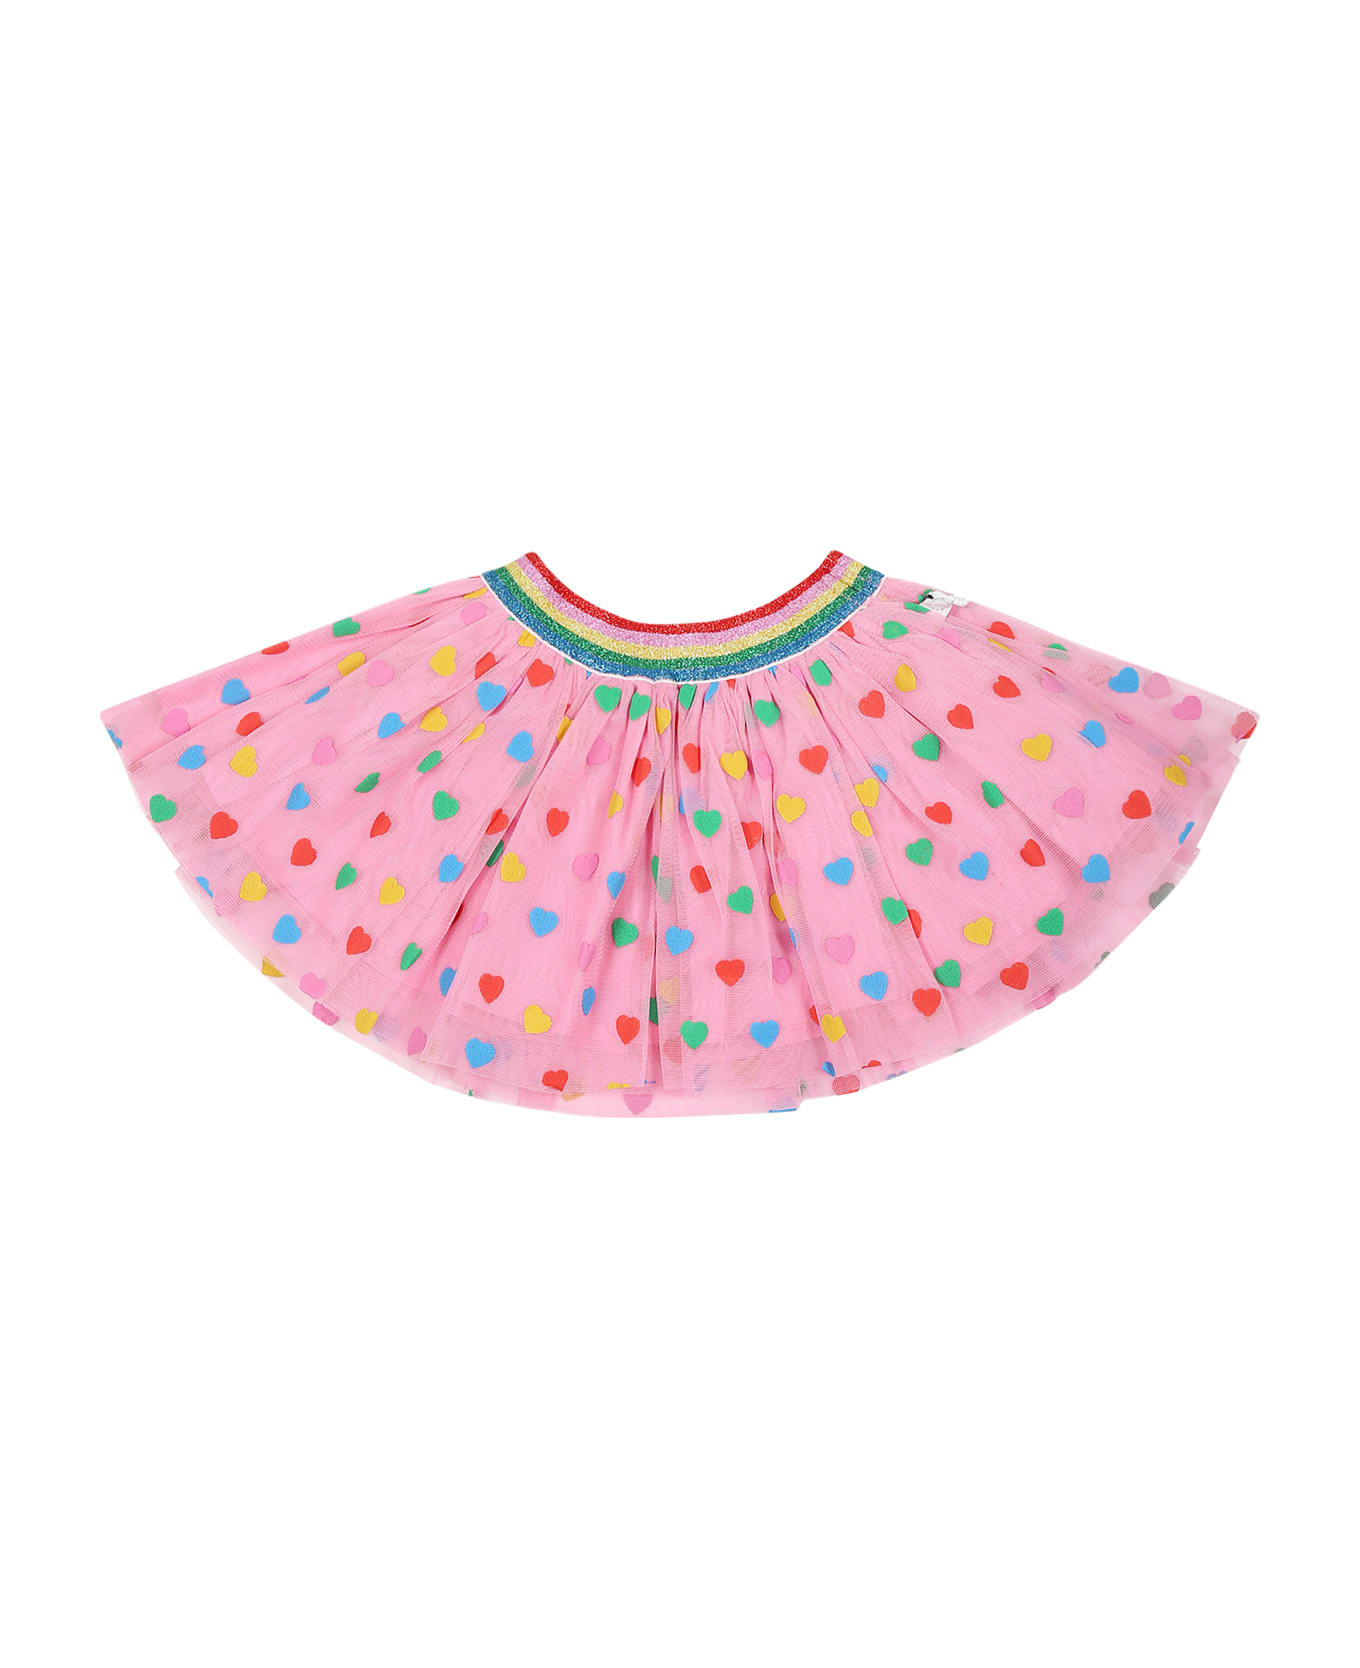 Stella McCartney Kids Pink Skirt For Baby Girl With Hearts - Pink